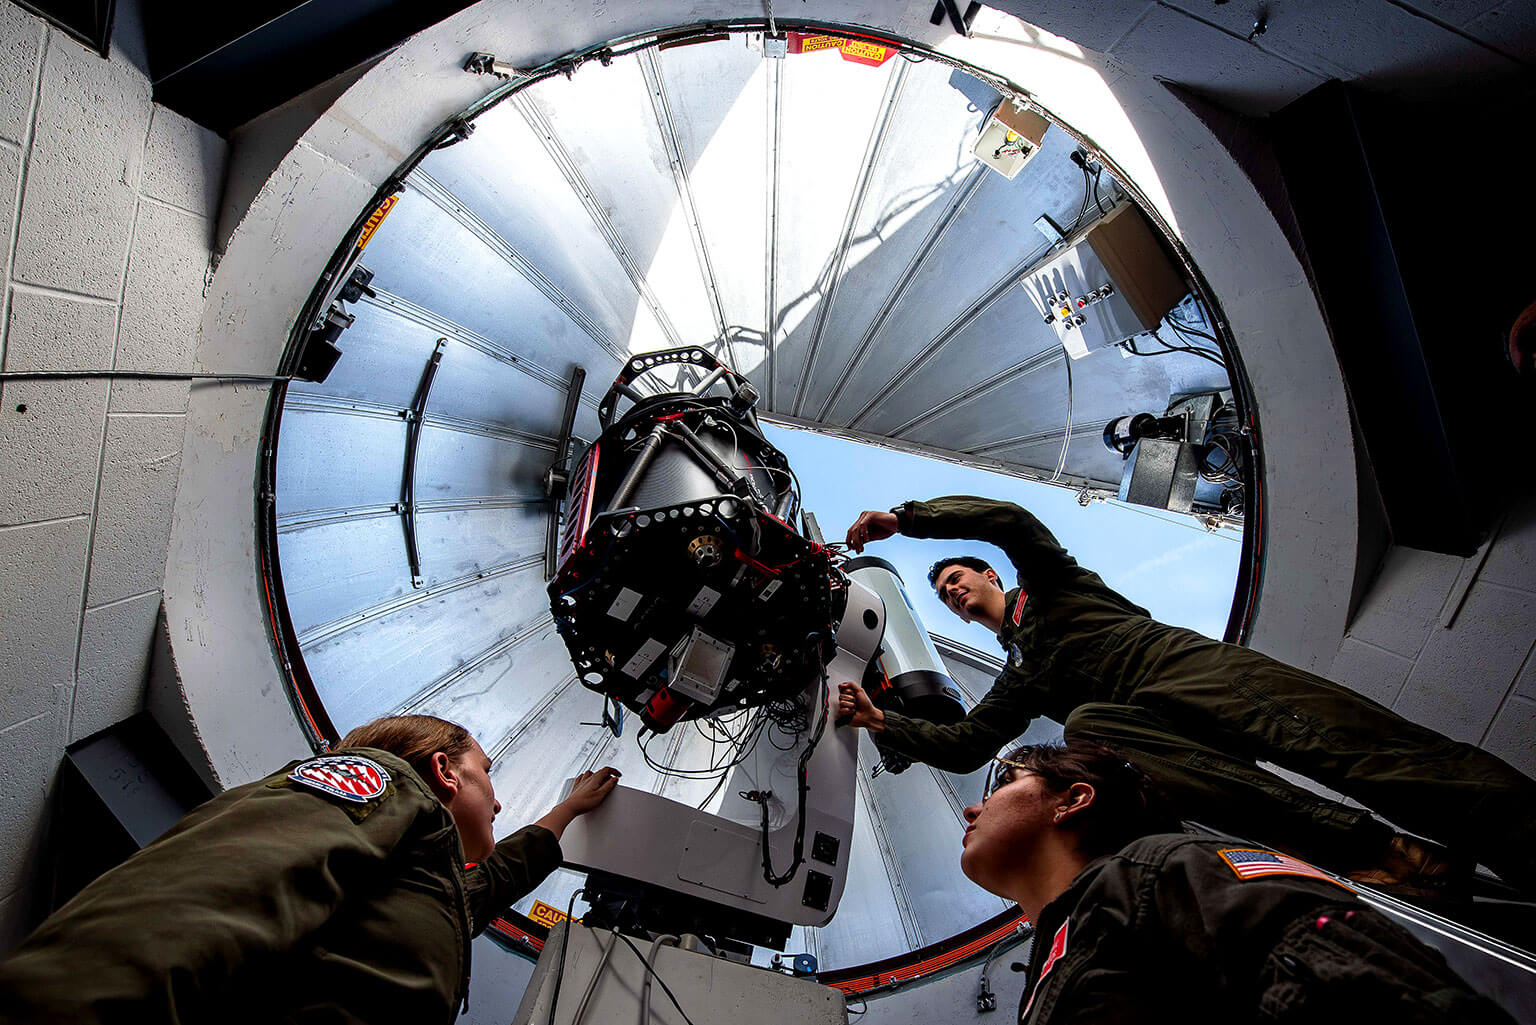 Cadet 2nd Class Brianna McVay, left, and Cadet 3rd Class Bethany Firooz watch as Cadet 3rd Class Ryan Kovacs makes minor modifications to the 0.5-meter Falcon telescope in the U.S. Air Force Academy Observatory